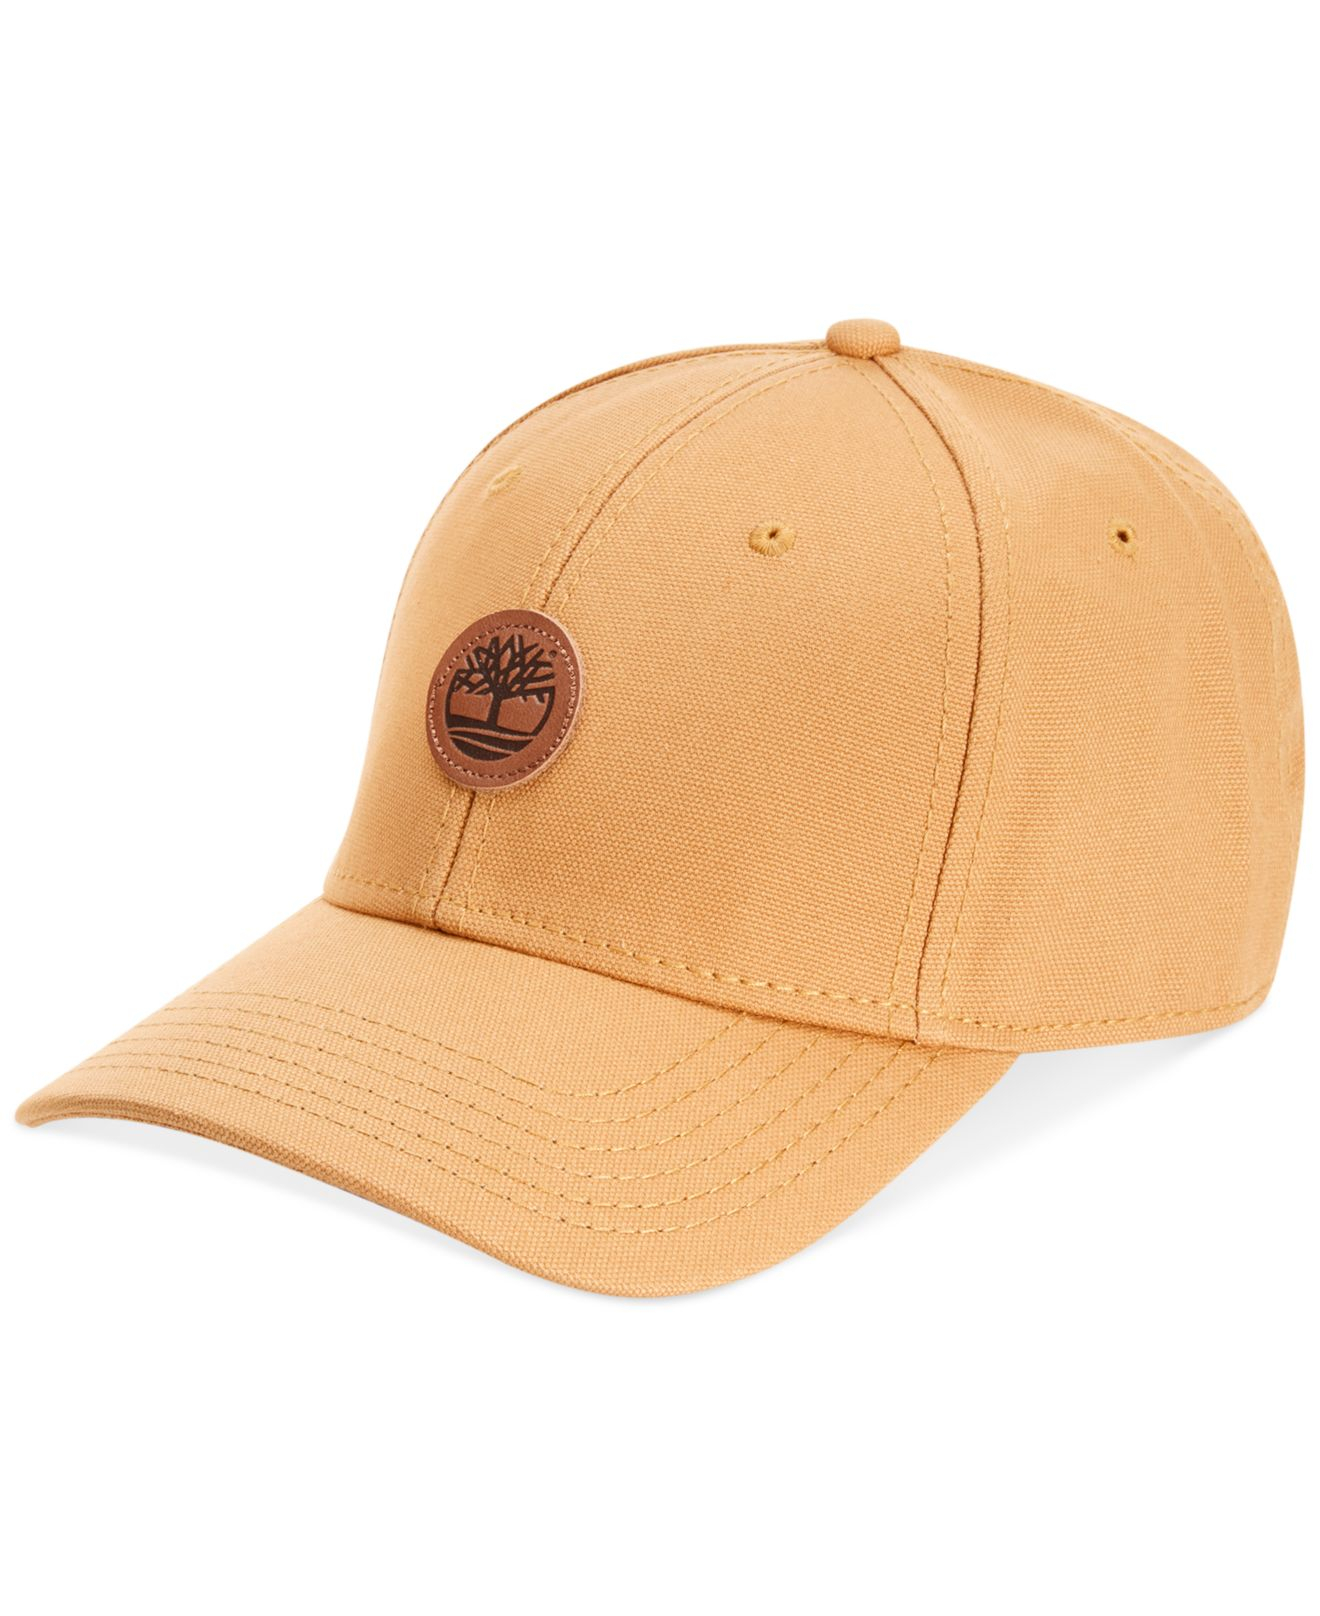 Timberland Cotton Baseball Cap in Natural for Men - Lyst